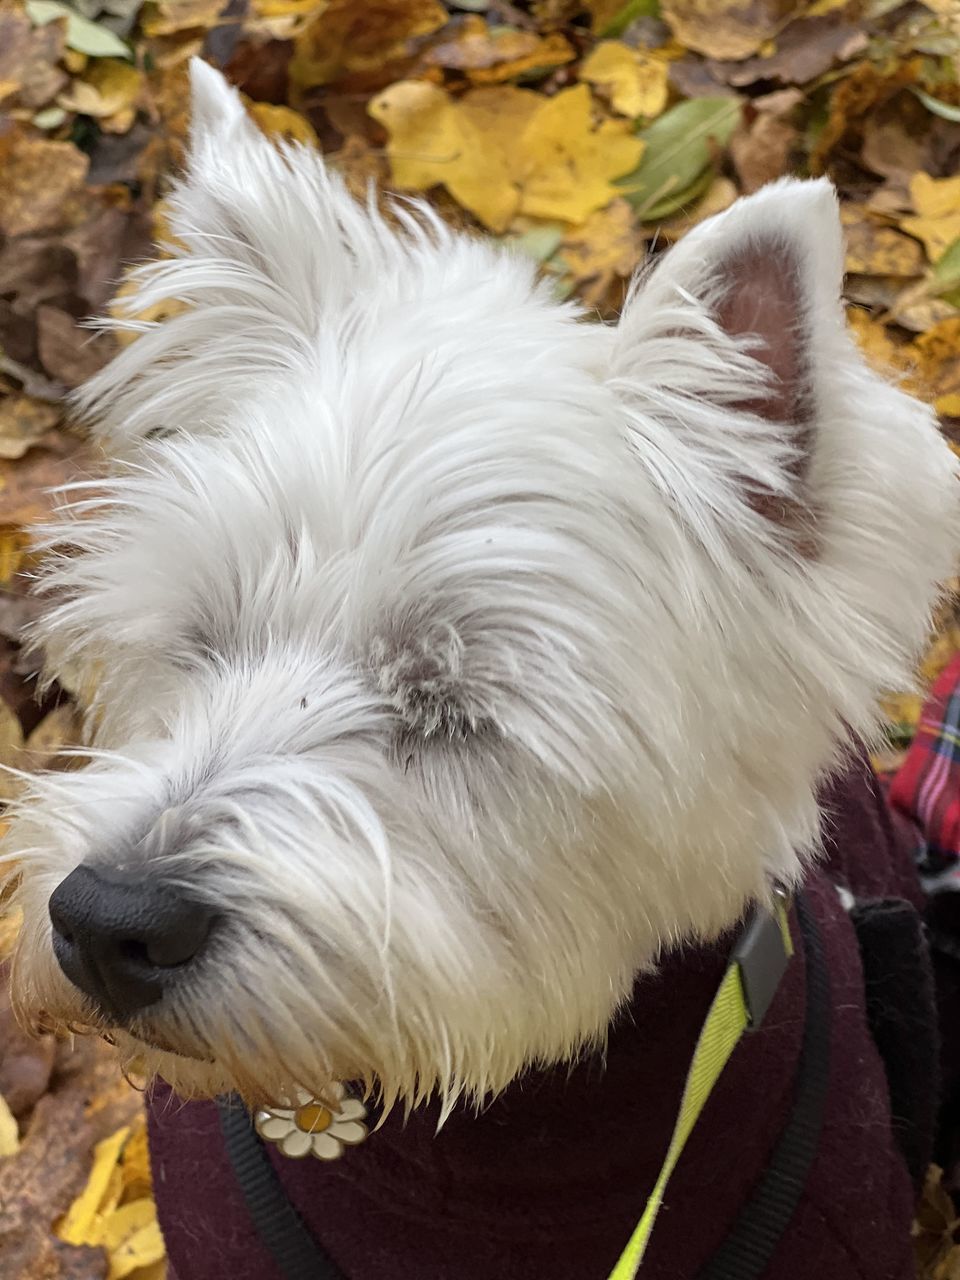 animal themes, animal, domestic animals, pet, one animal, mammal, canine, dog, west highland white terrier, animal hair, terrier, white, no people, relaxation, animal body part, lying down, plant part, cute, nature, leaf, young animal, close-up, puppy